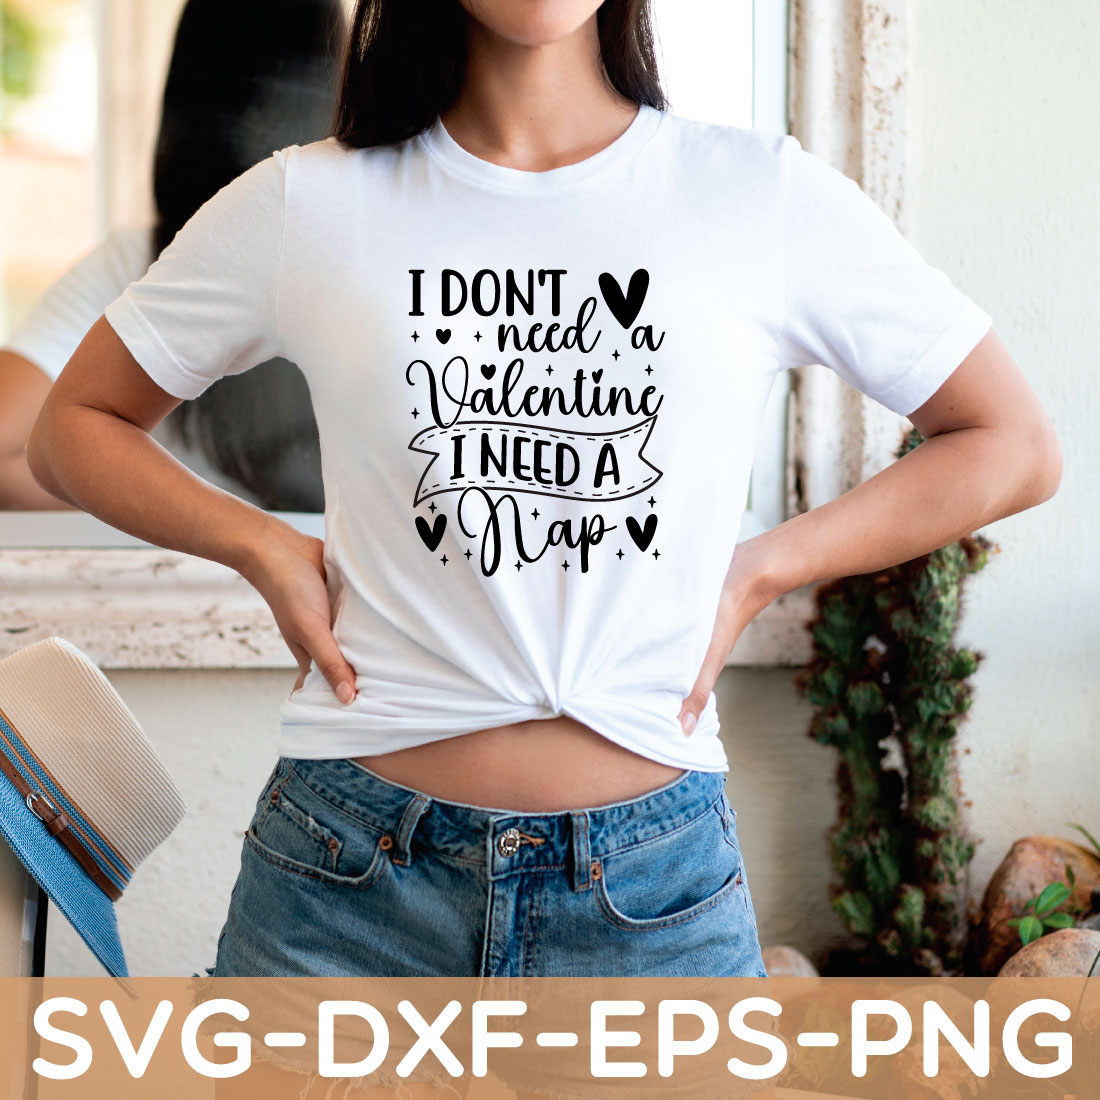 i don't need a valentine i need a nap shirt preview image.